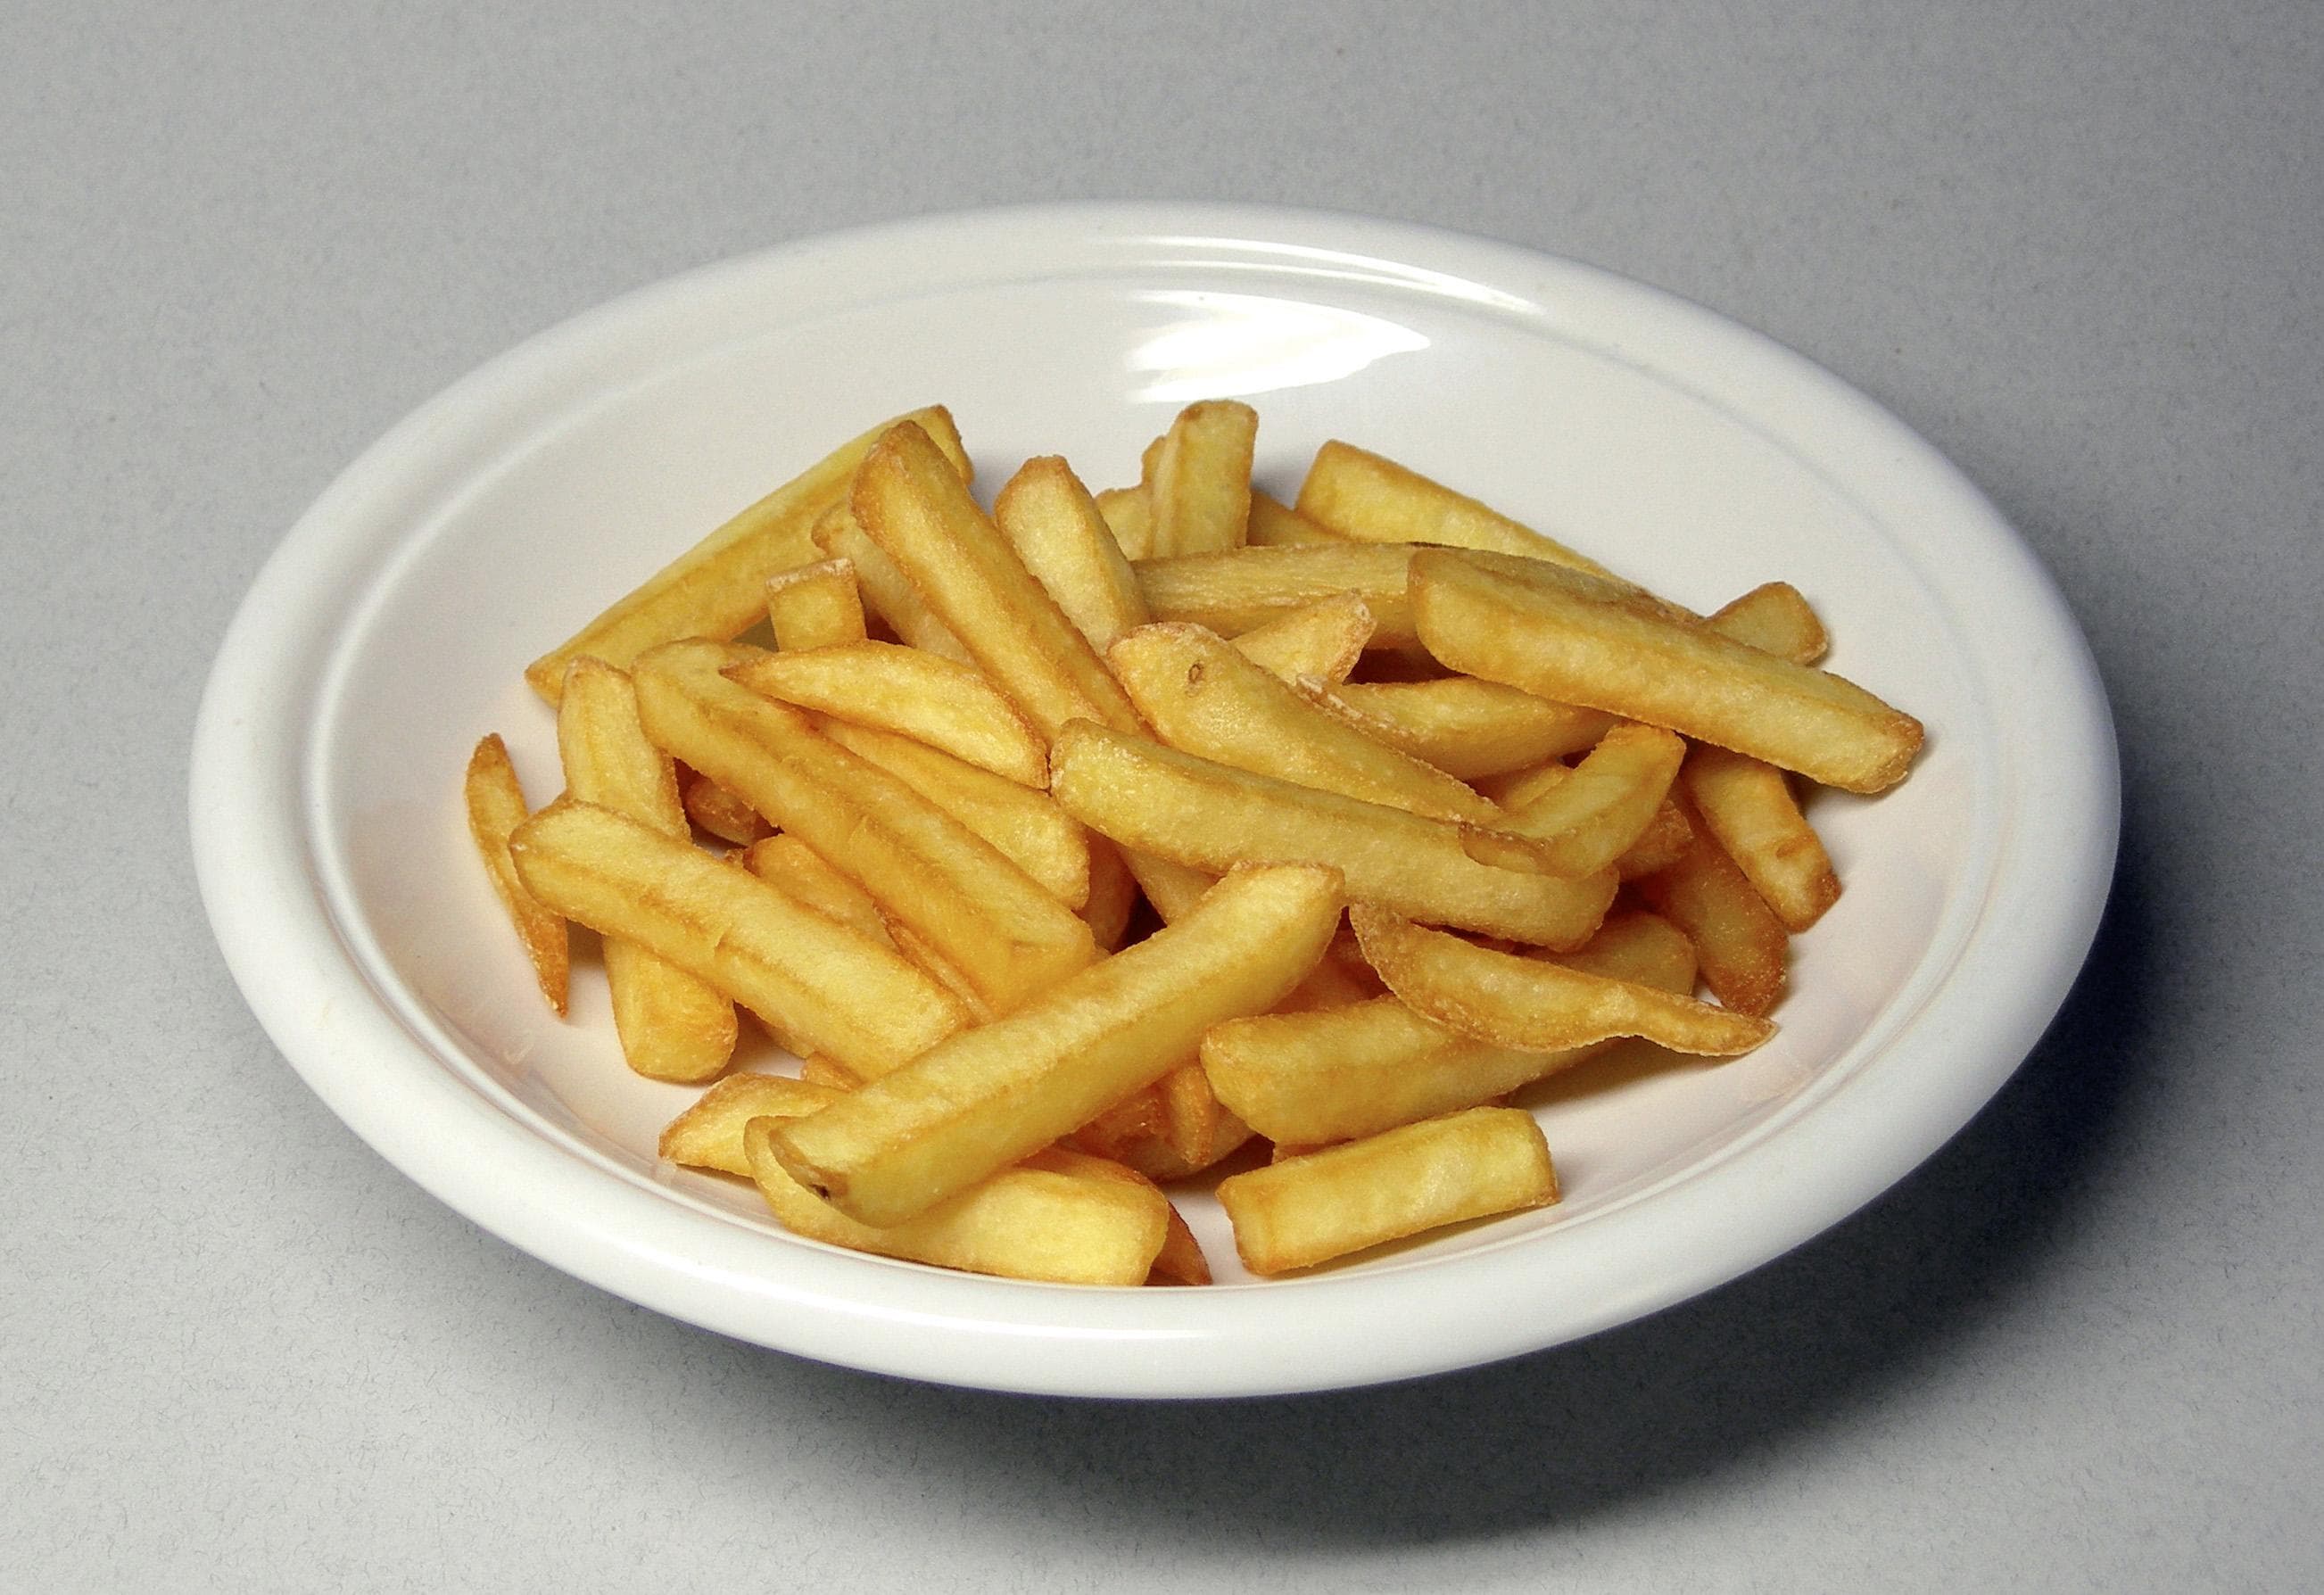 French fries on Random Most Delicious Foods to Dunk of Deep Fry